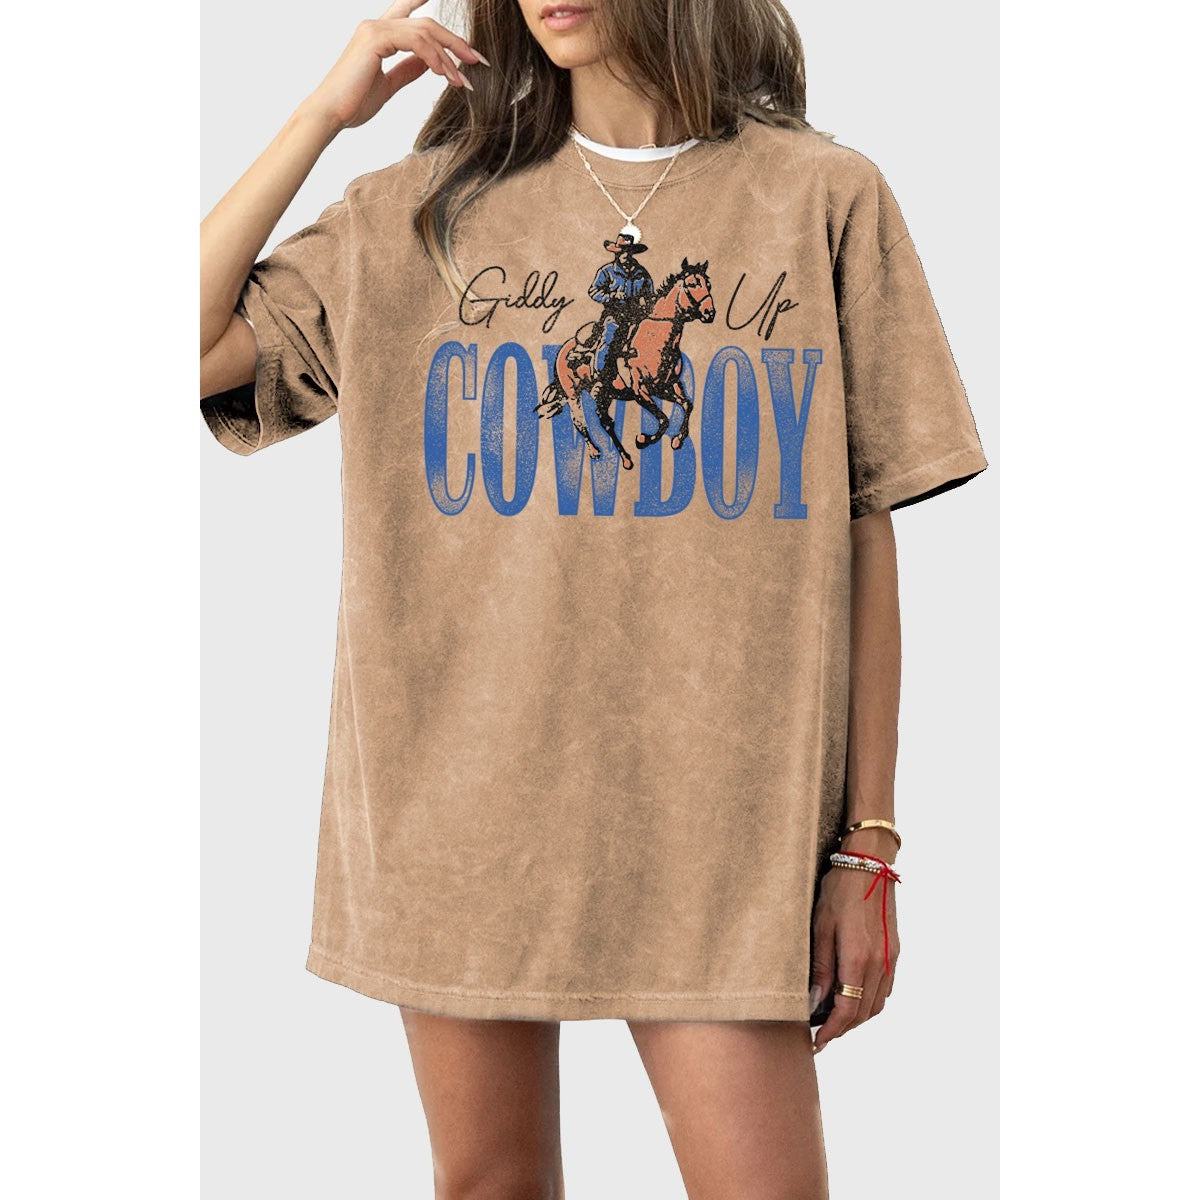 GIDDY UP COWBOY OVERSIZED GRAPHIC TEE: Mineral Taupe